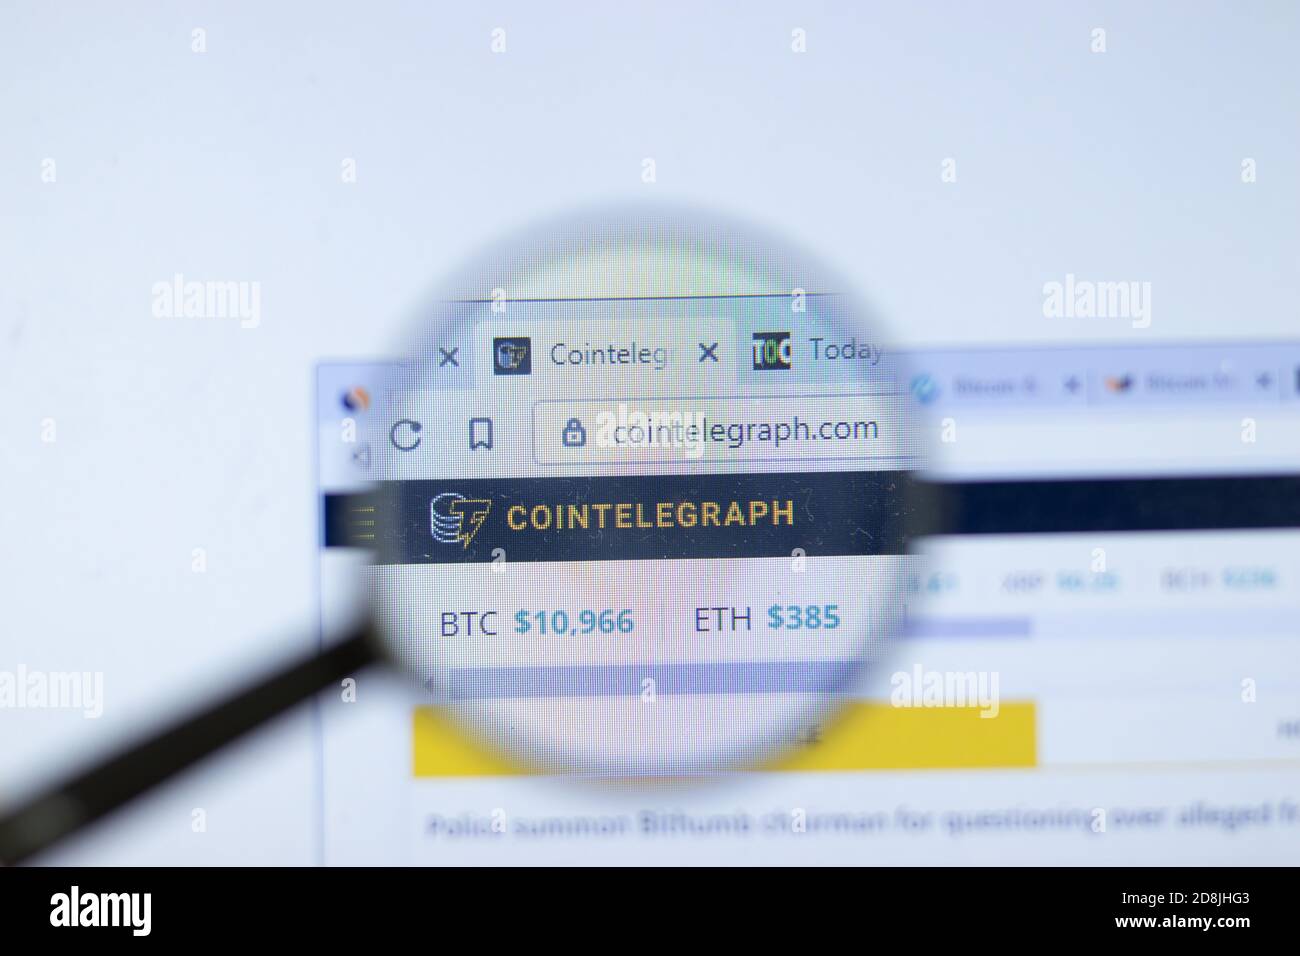 New York, USA - 26 October 2020: Cointelegraph company website with logo close up, Illustrative Editorial Stock Photo